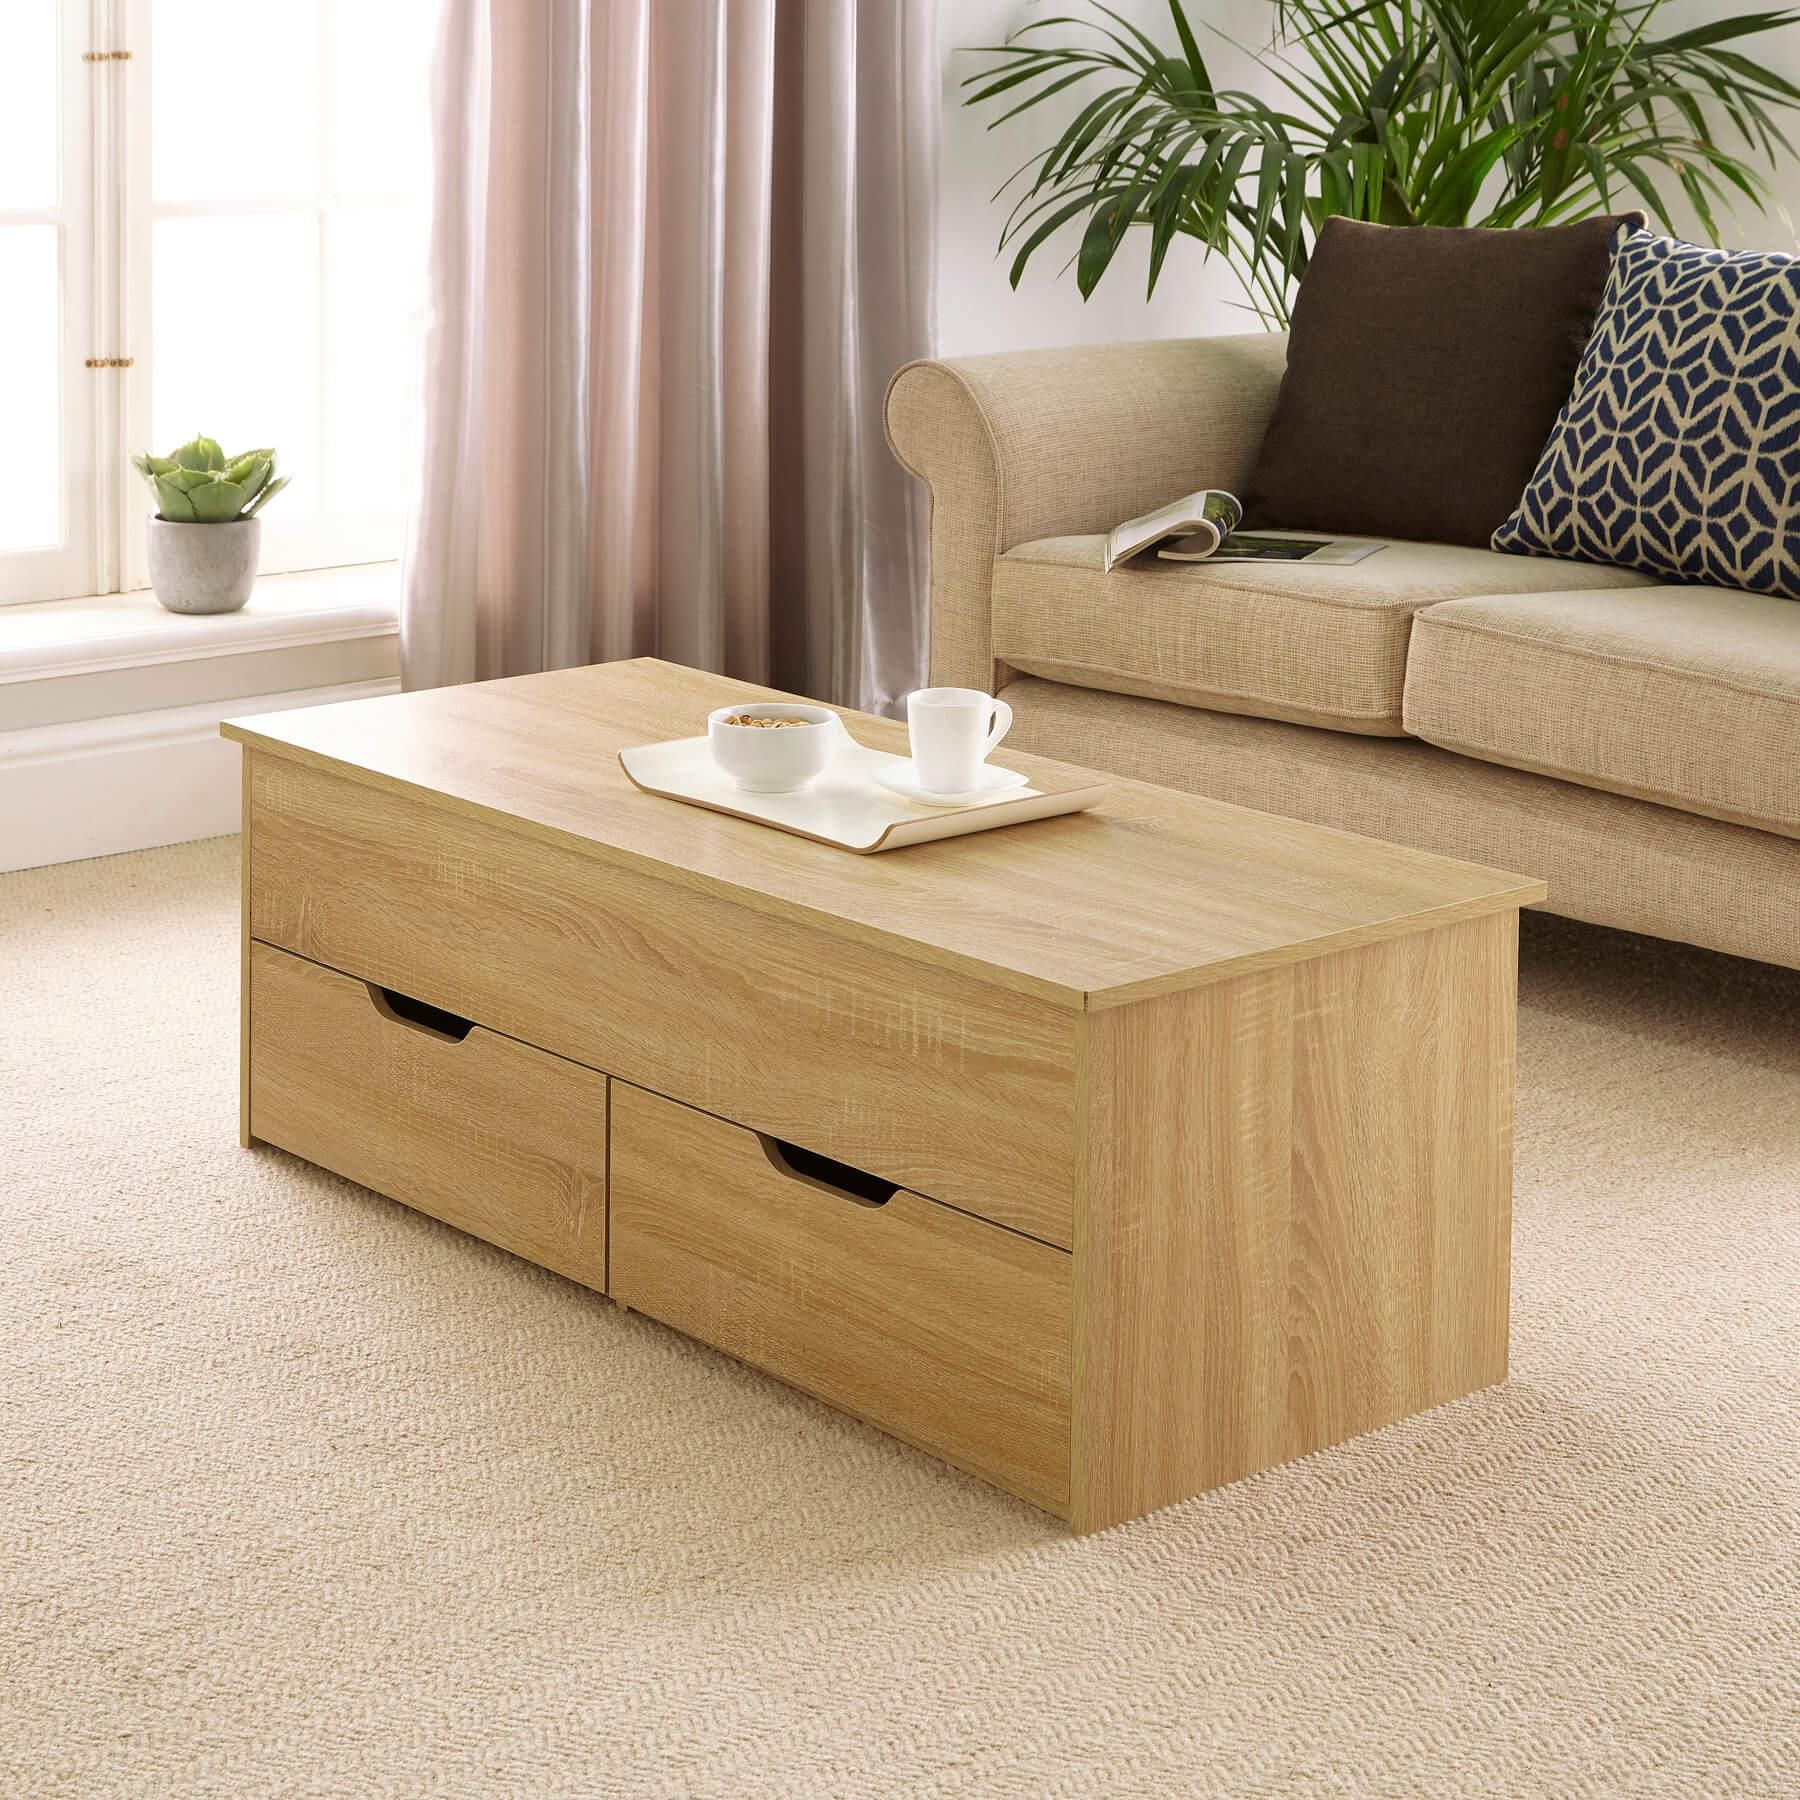 Oak Wooden Coffee Table With Lift Up Top And 2 Large Storage Drawers Regarding Lift Top Coffee Tables With Storage Drawers (View 9 of 15)